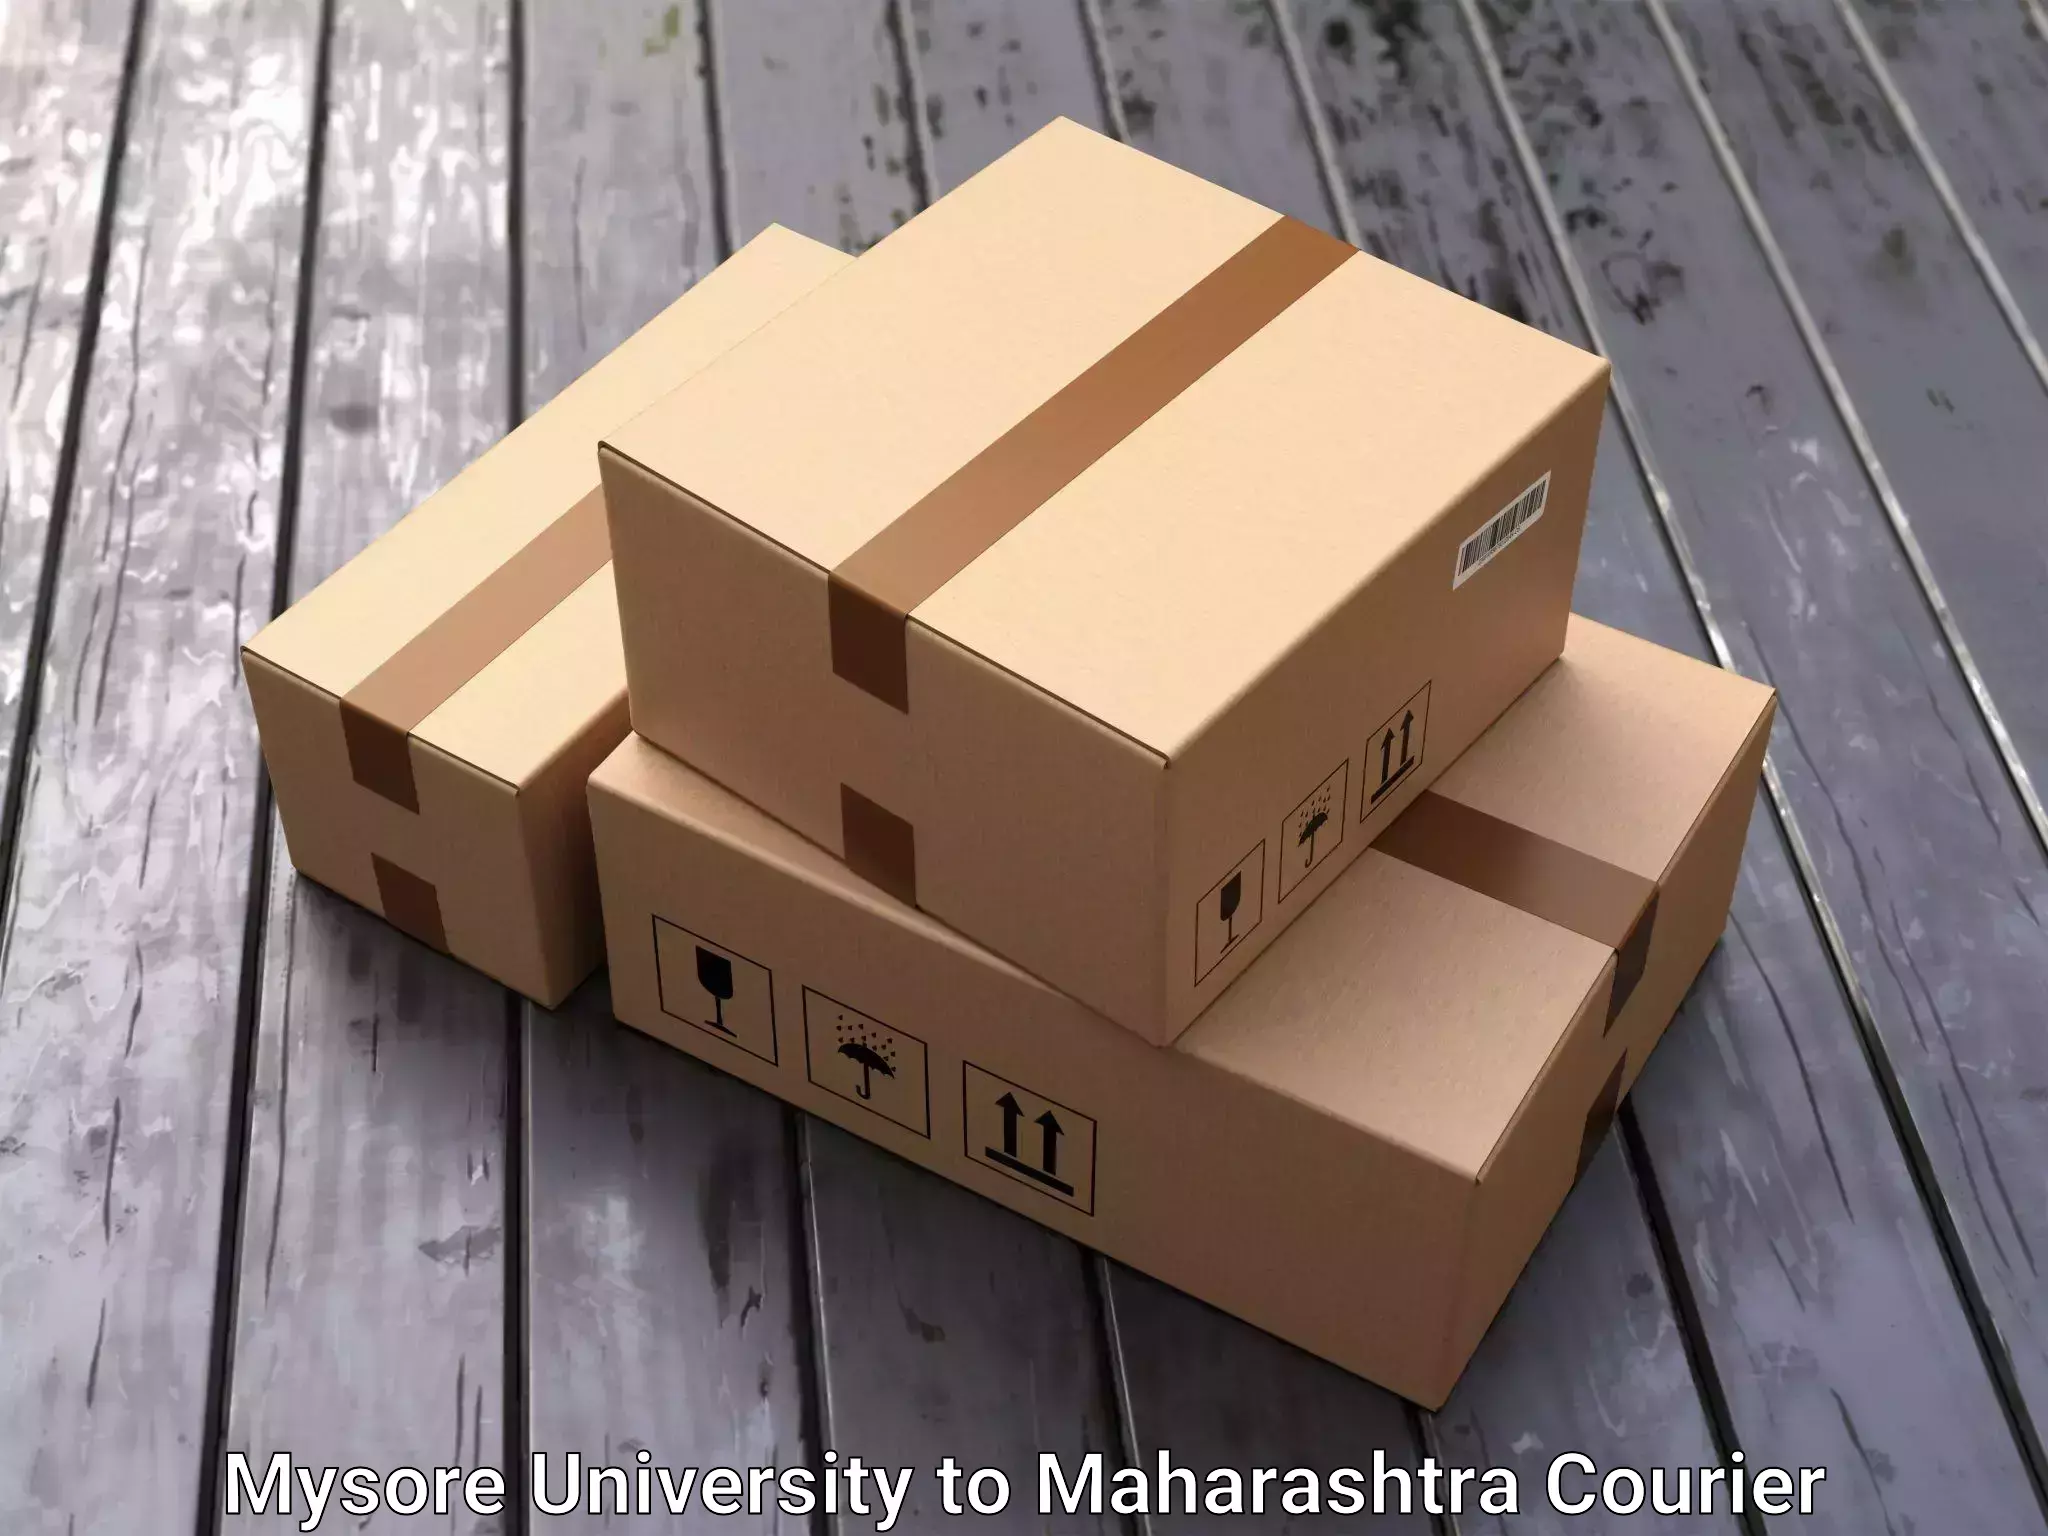 Budget-friendly moving services Mysore University to Panchwad